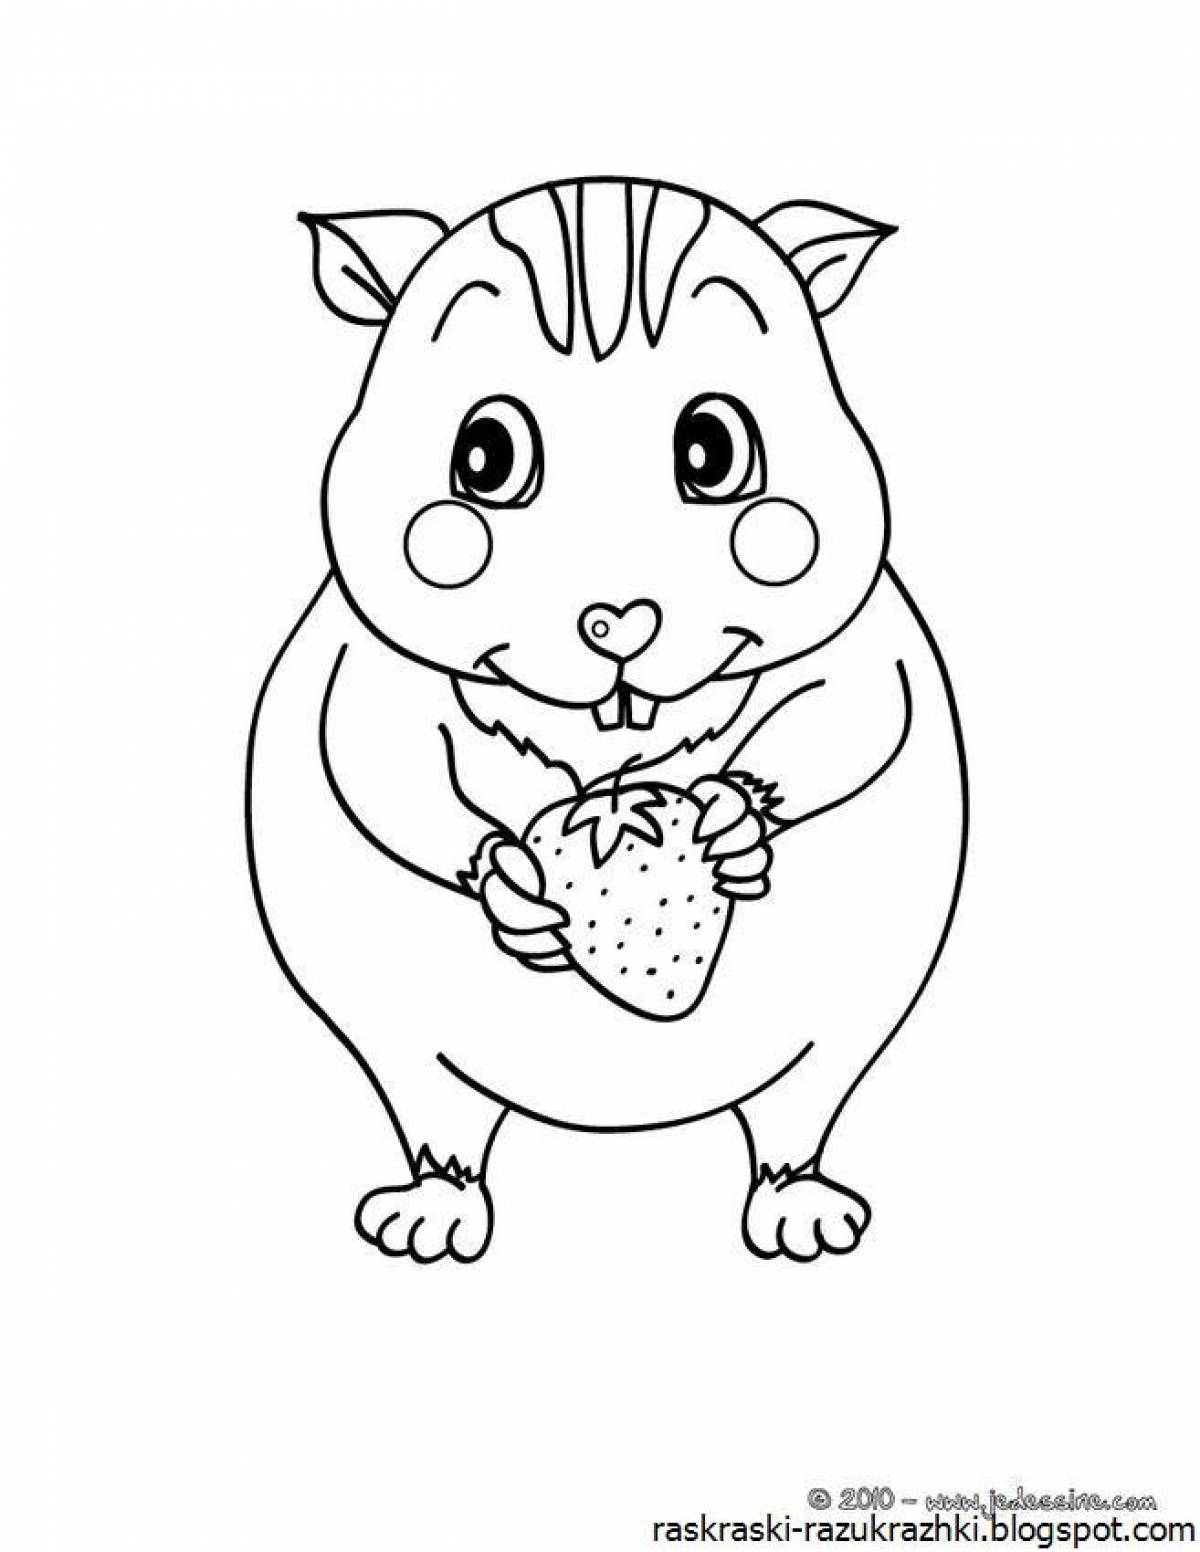 Colorful hamster coloring book for kids